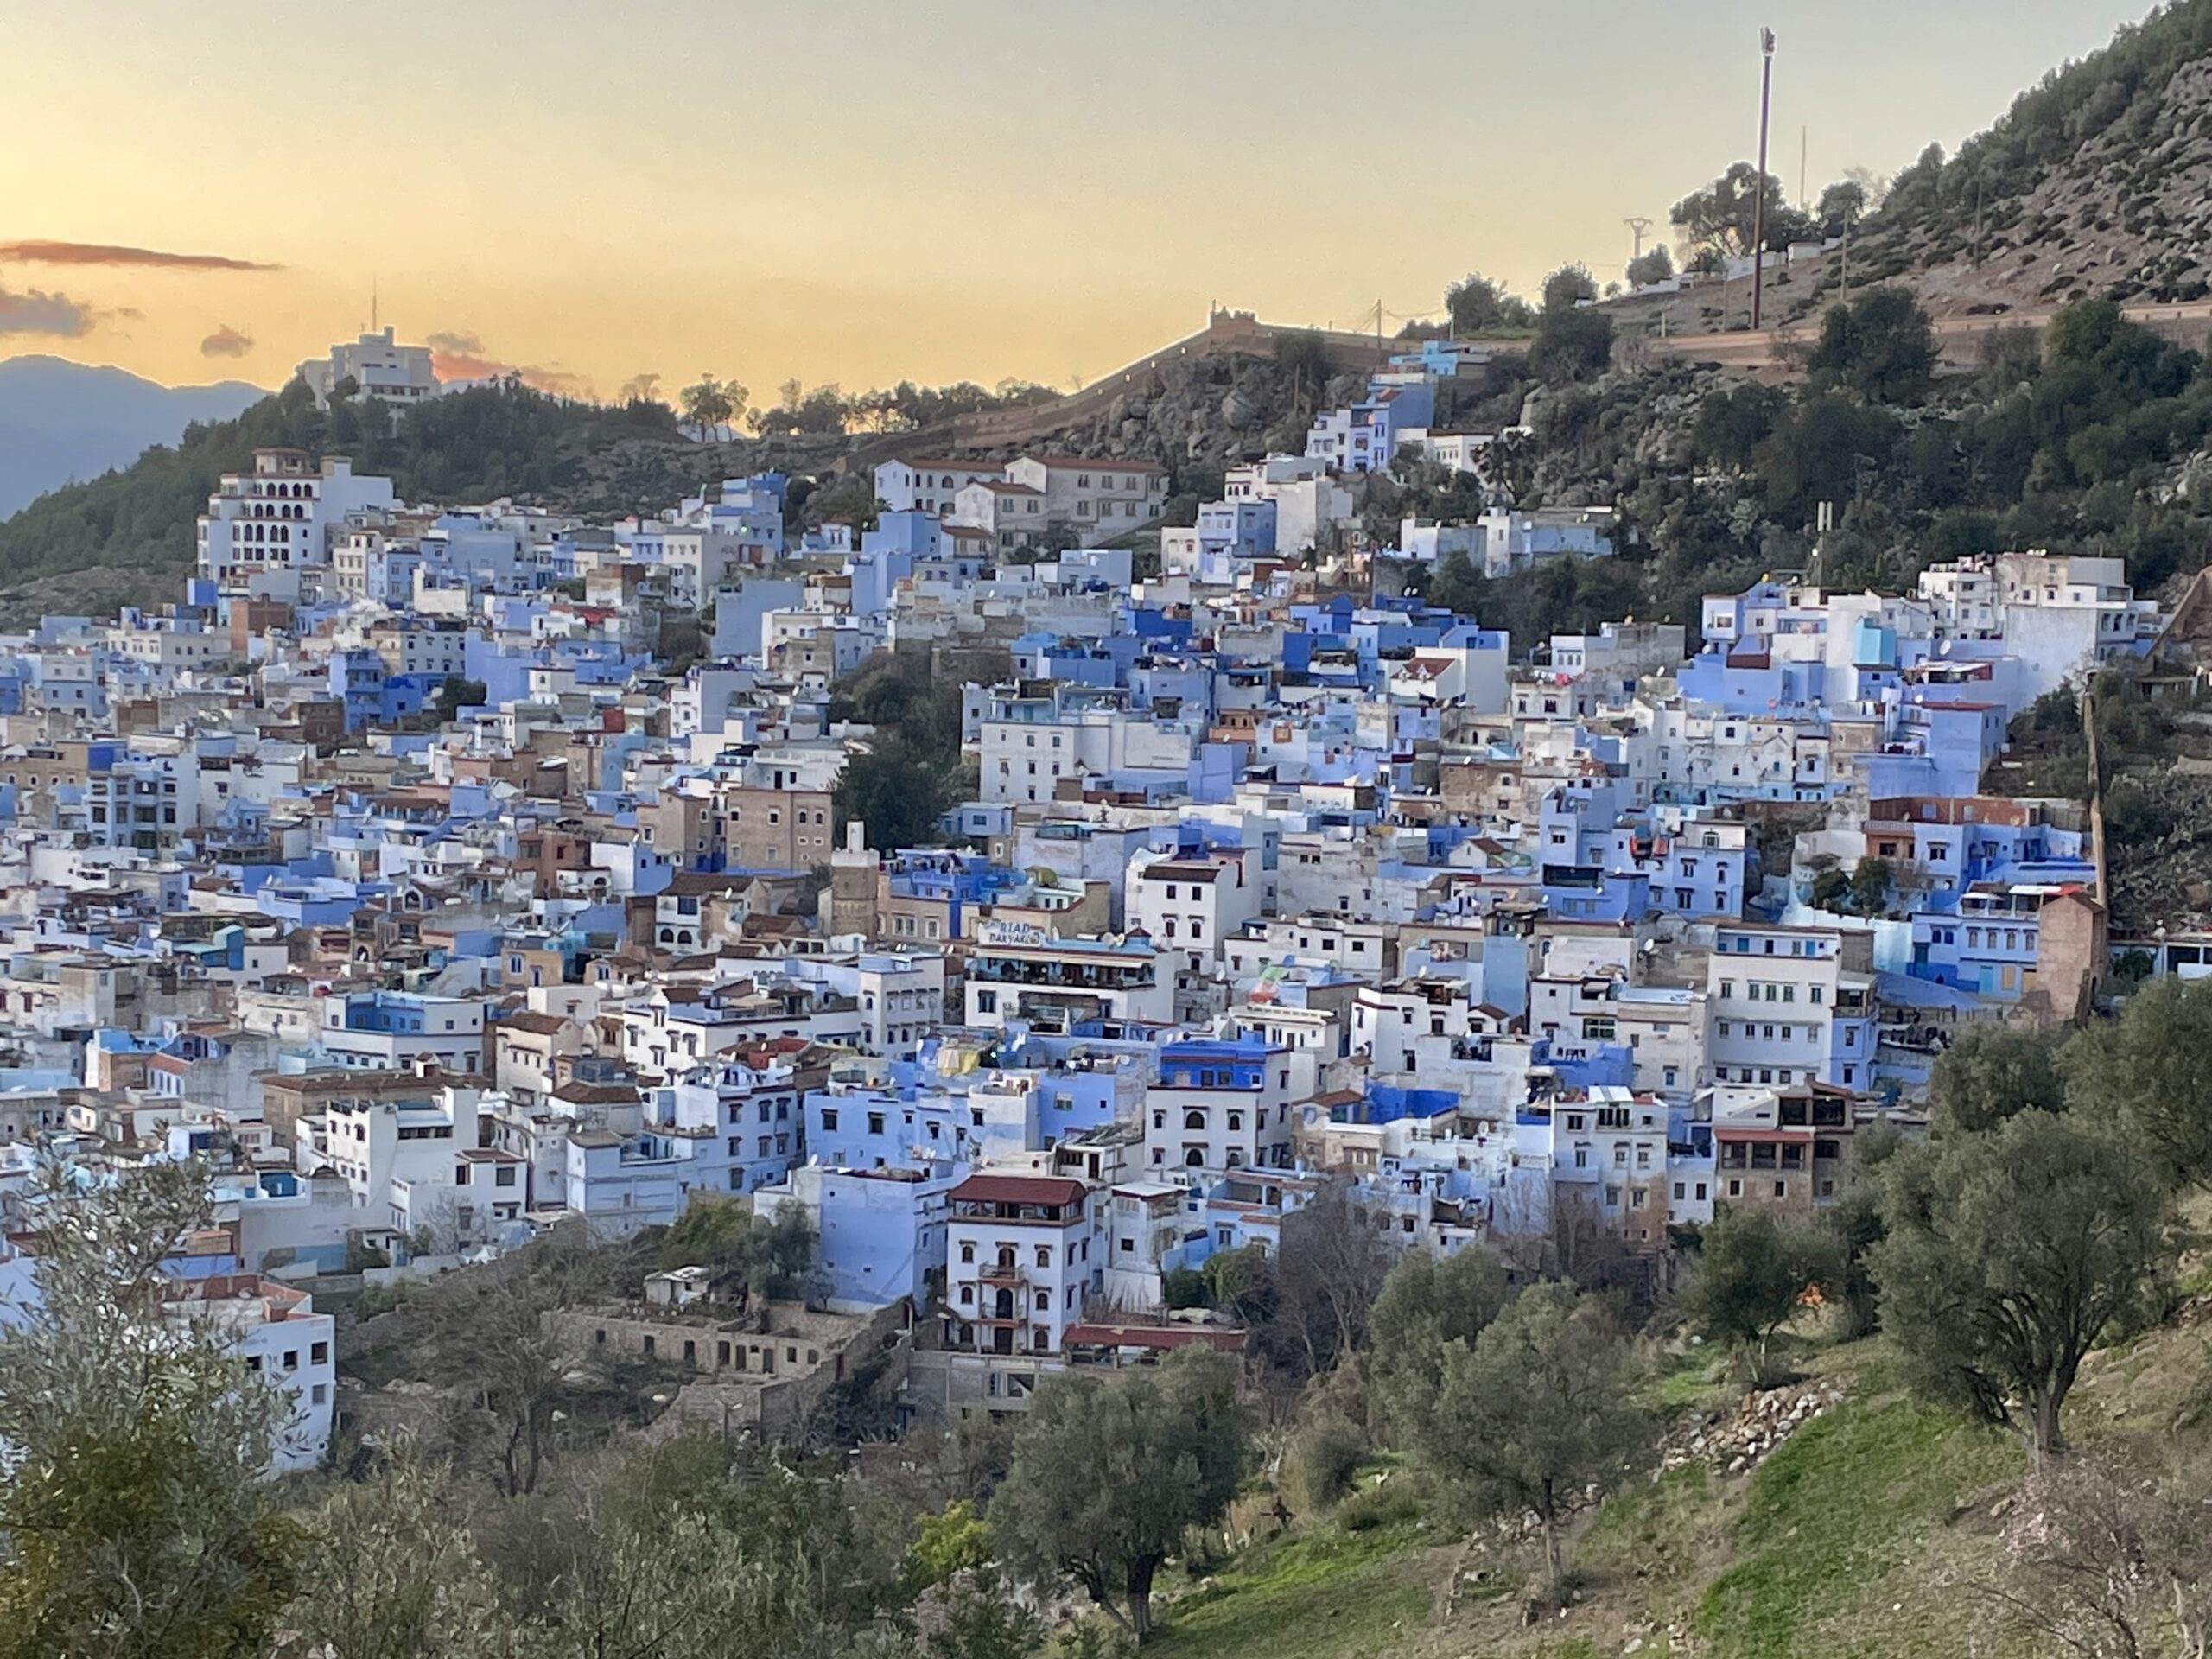 Morocco's Blue City in the Rif Mountains. Photo By Barbara Redding